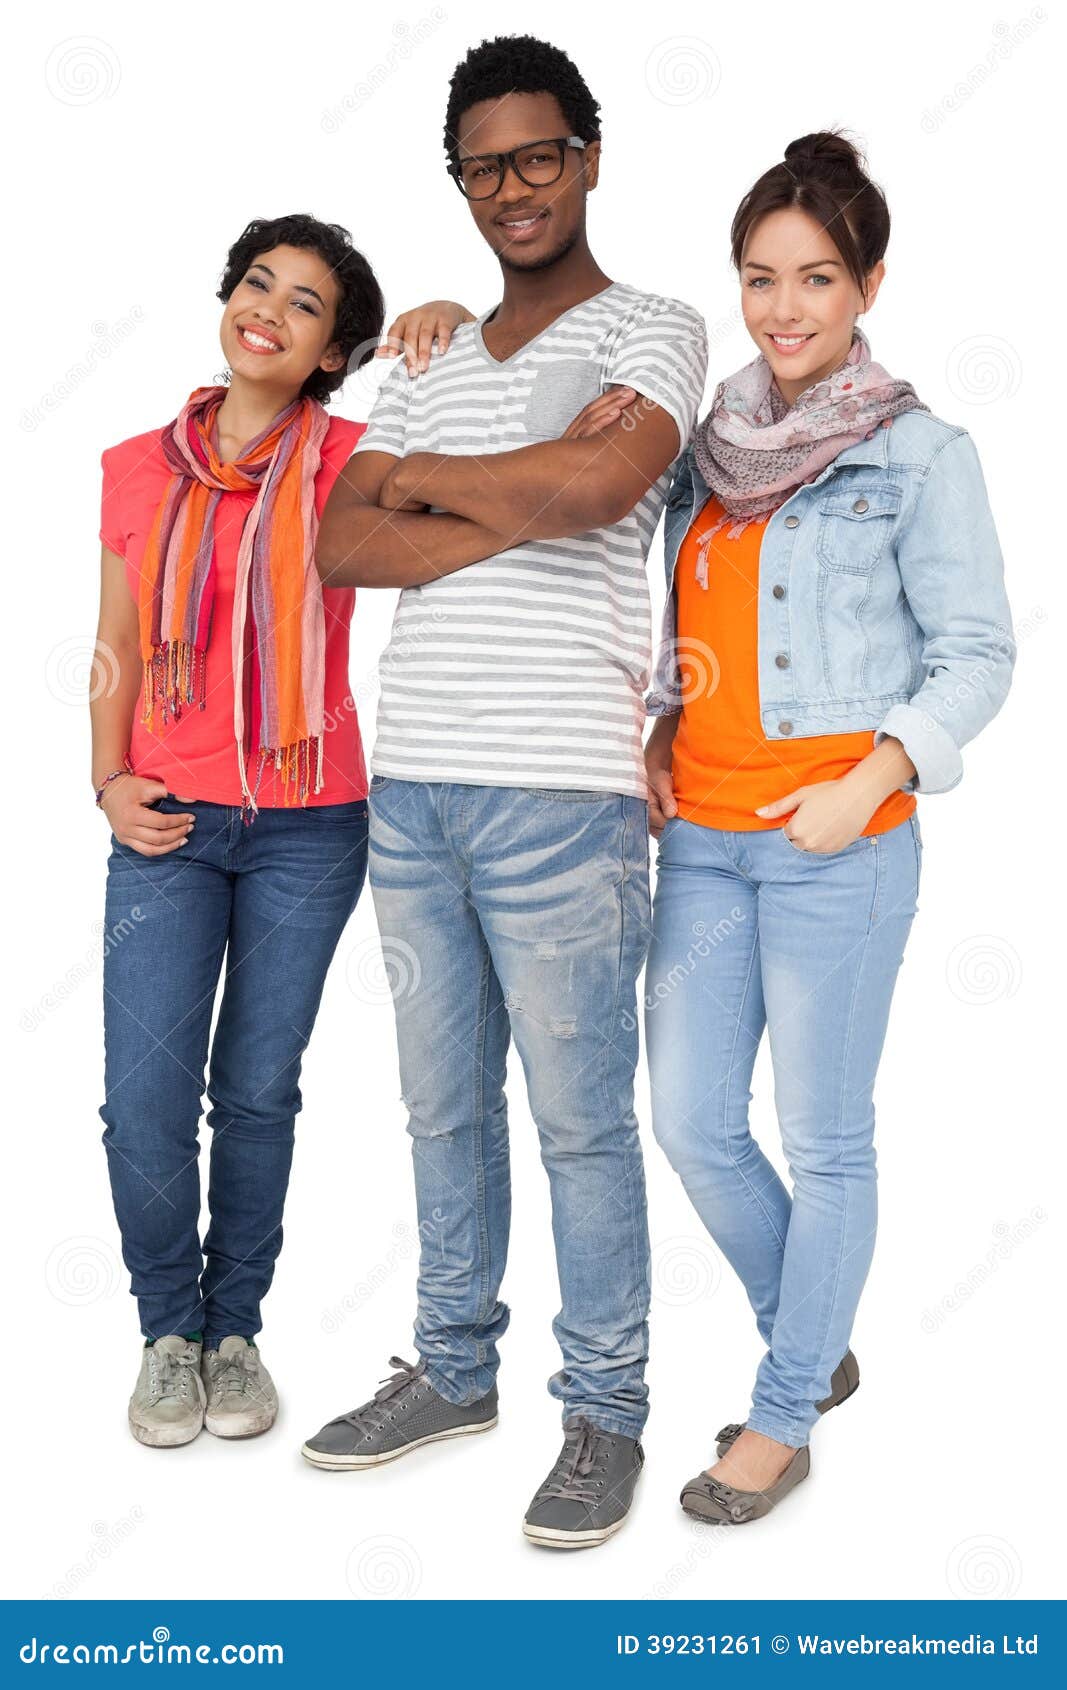 Full Length Portrait of Three Cool Young Friends Stock Image - Image of ...